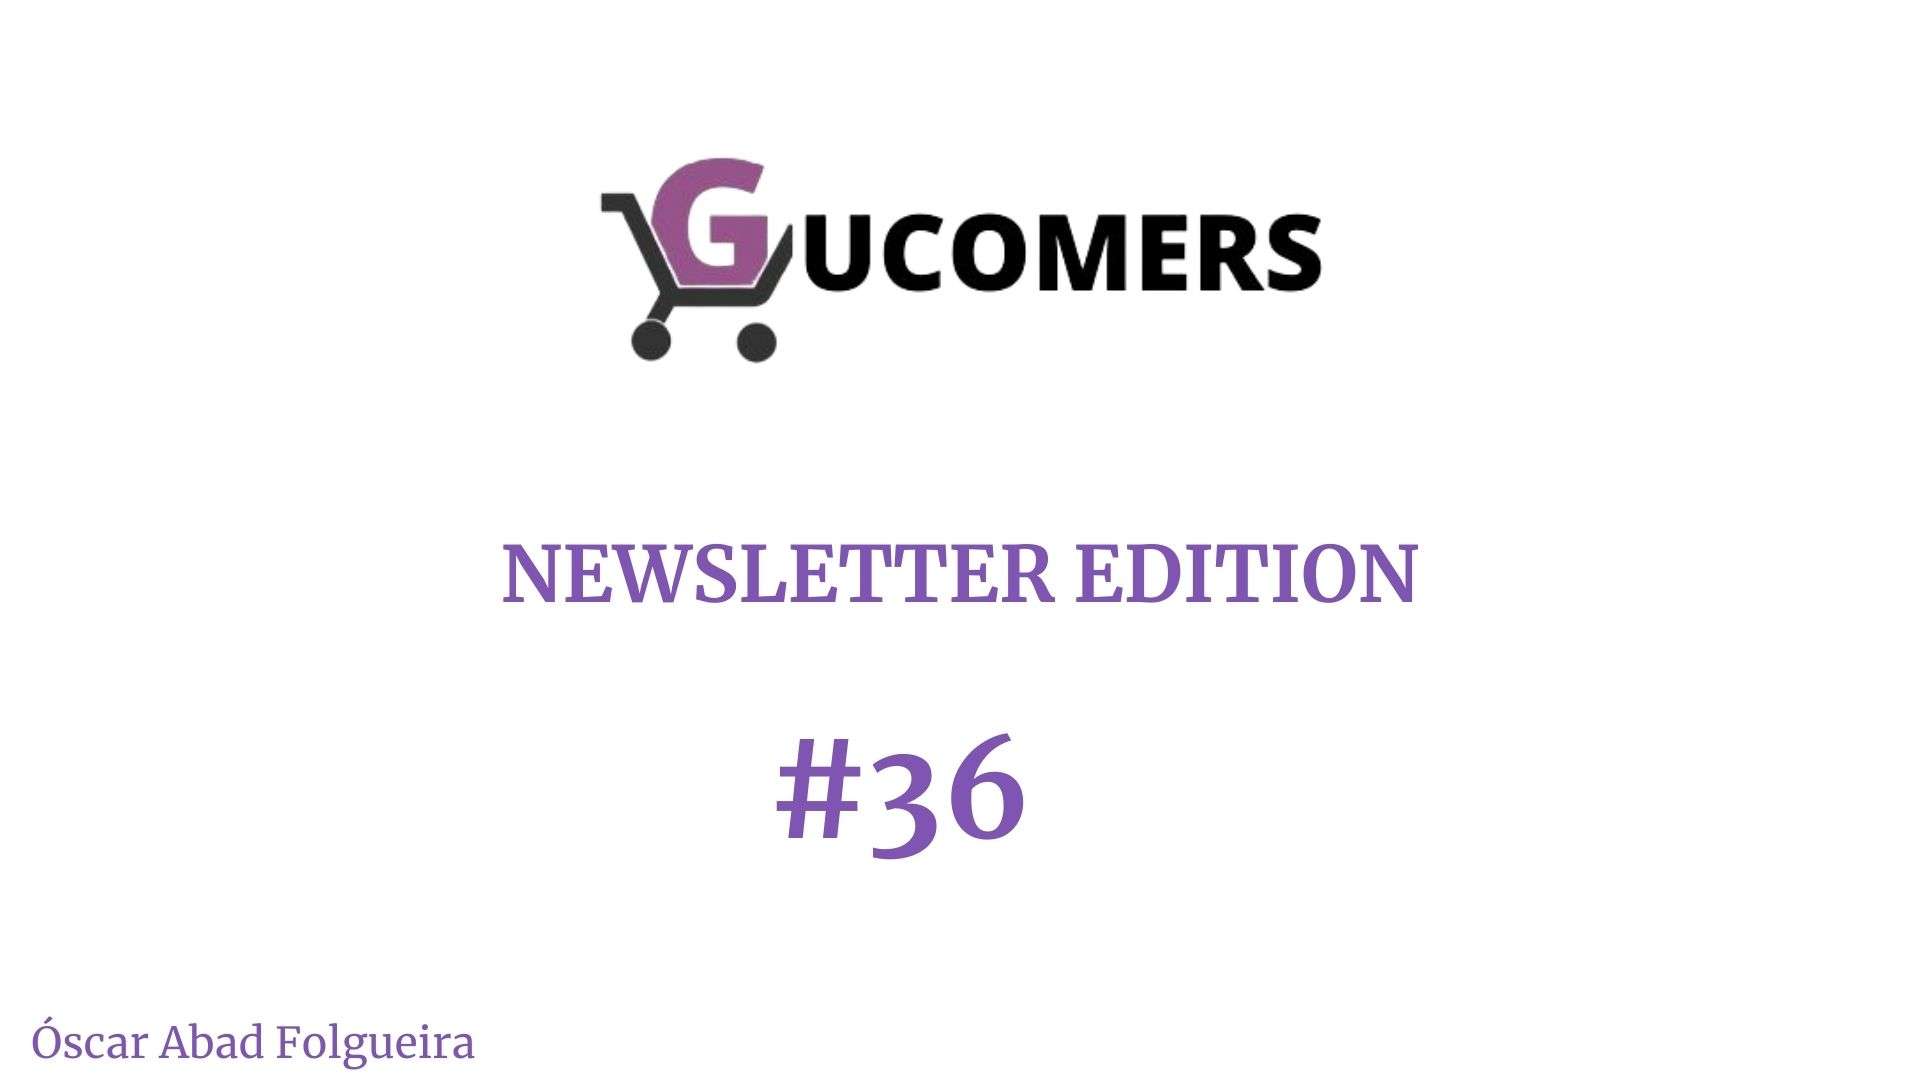 Newsletter Gucomers #36 – WooCommerce 6.0 liberado y disponible.